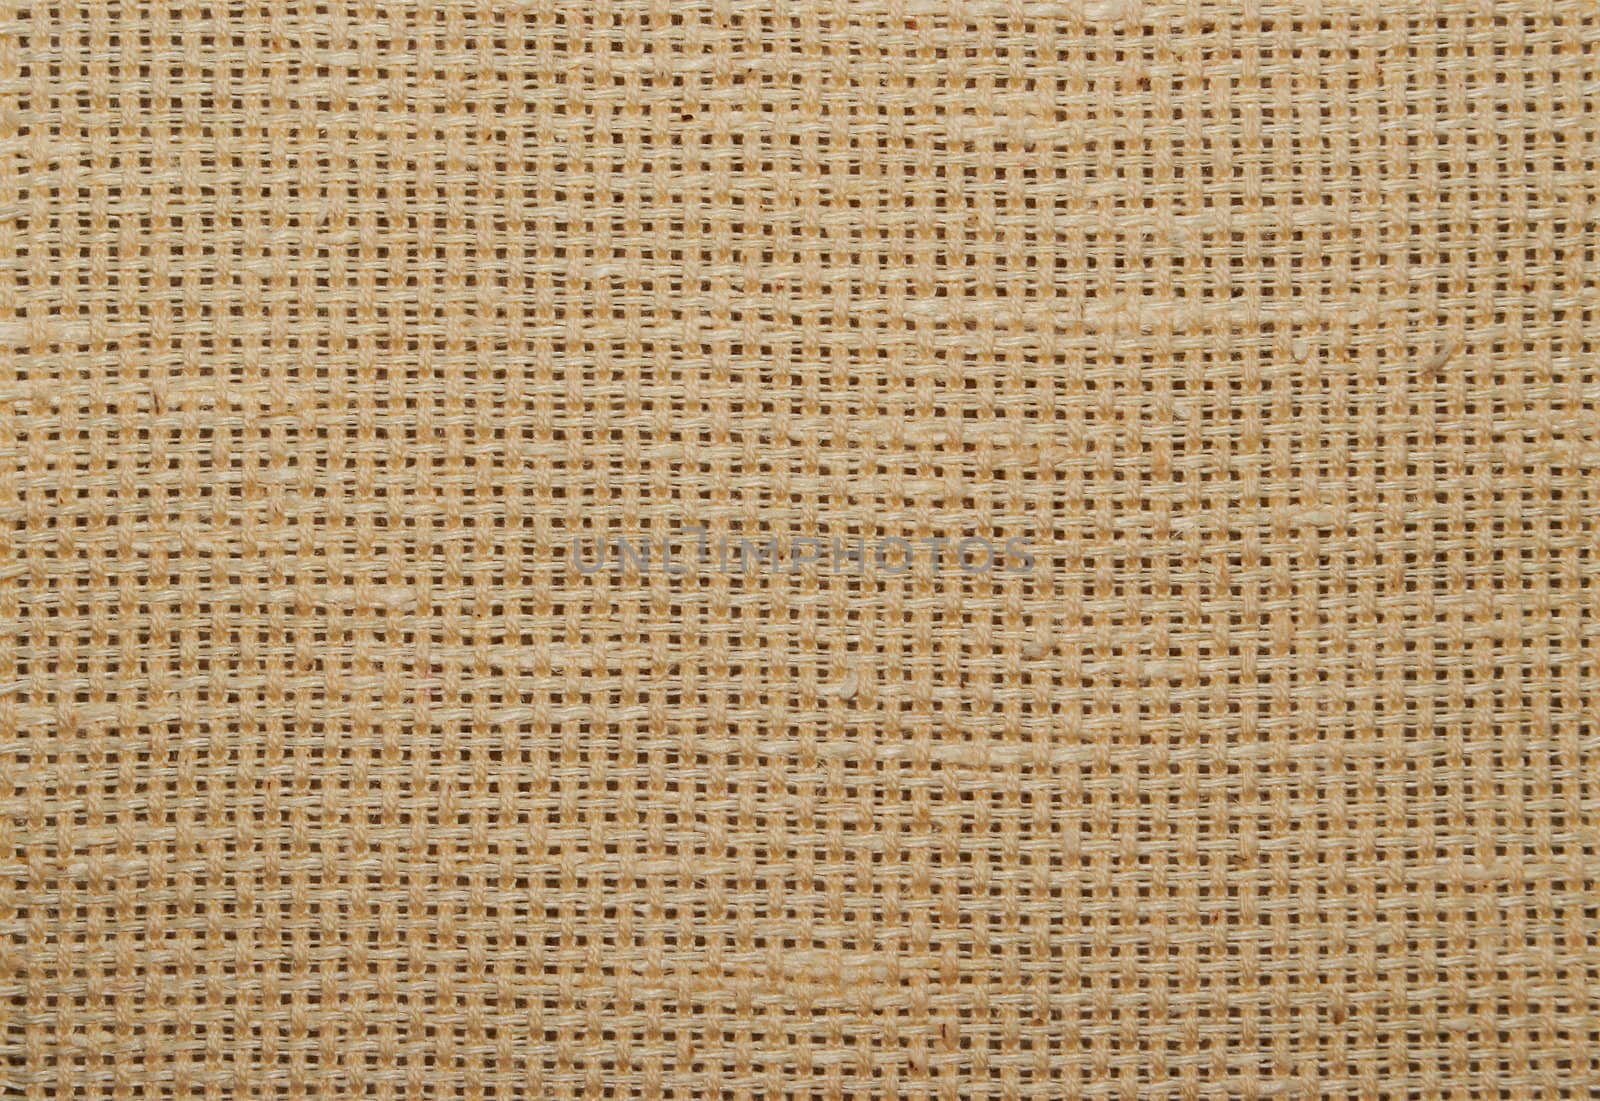 Old rustic homespun cloth as background